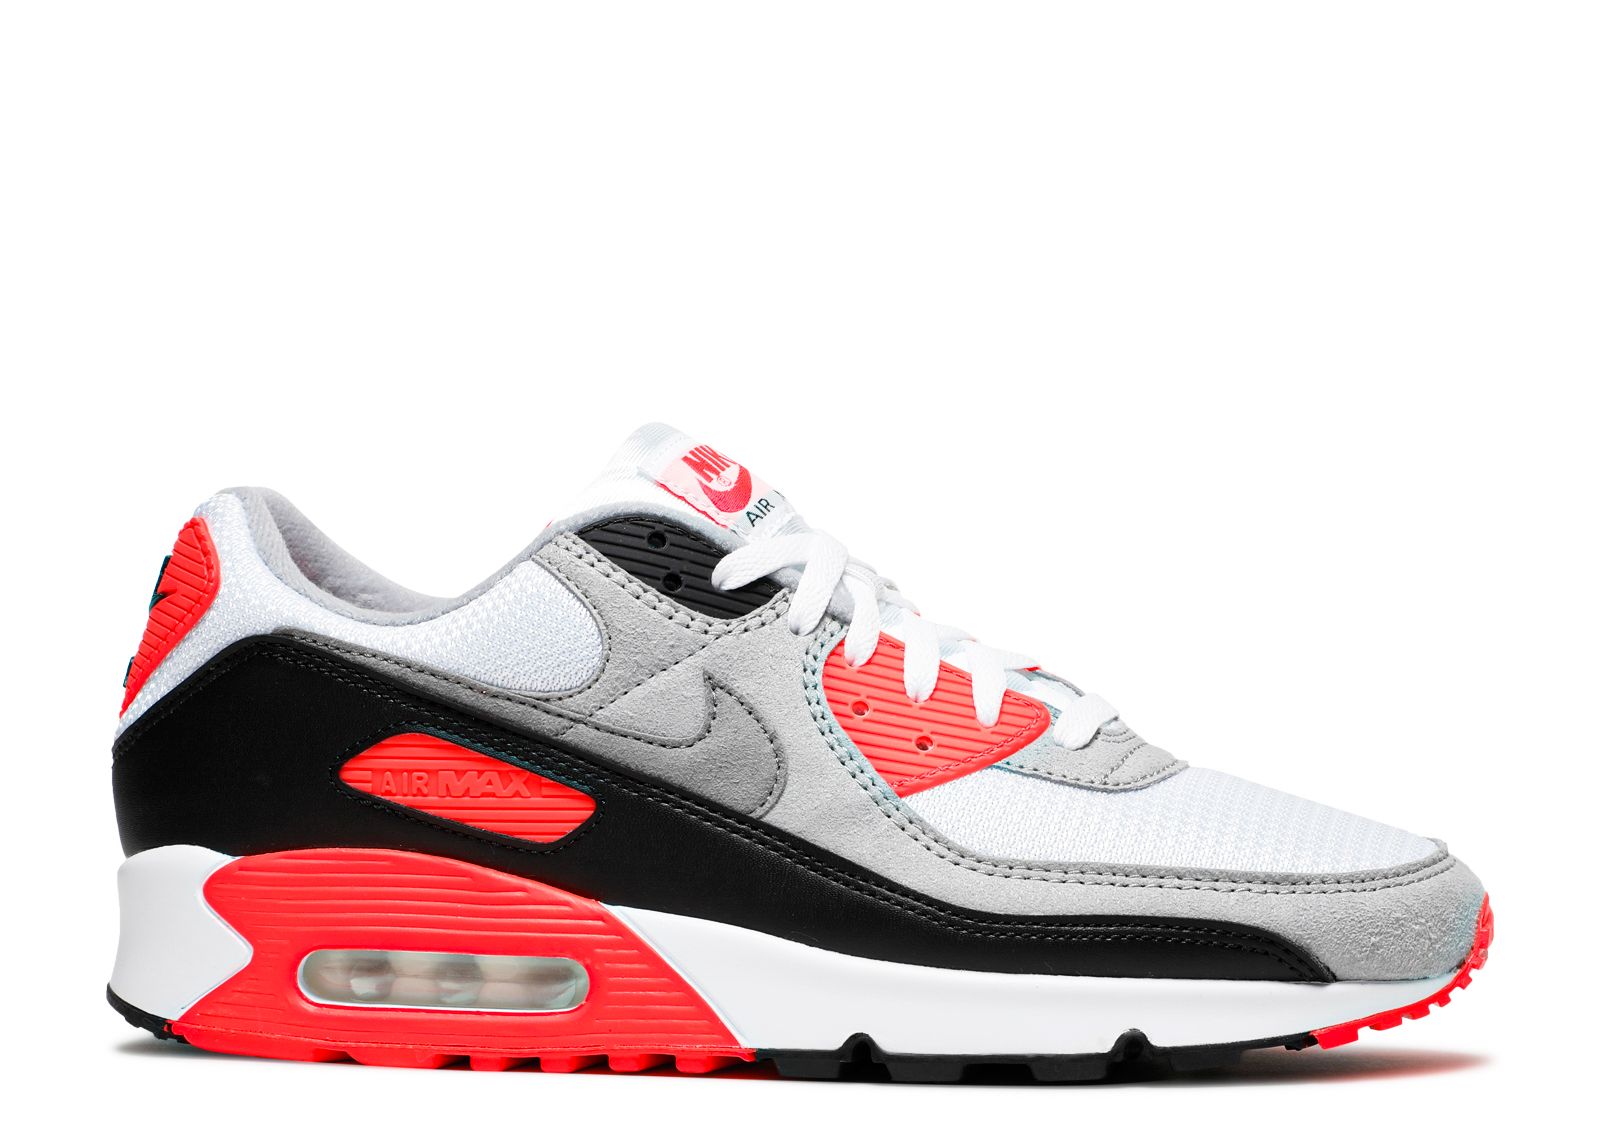 Espectador brillo Hacer Air Max 90 'Infrared' 2020 - Nike - CT1685 100 - white/black/cool  grey/radiant red | Flight Club